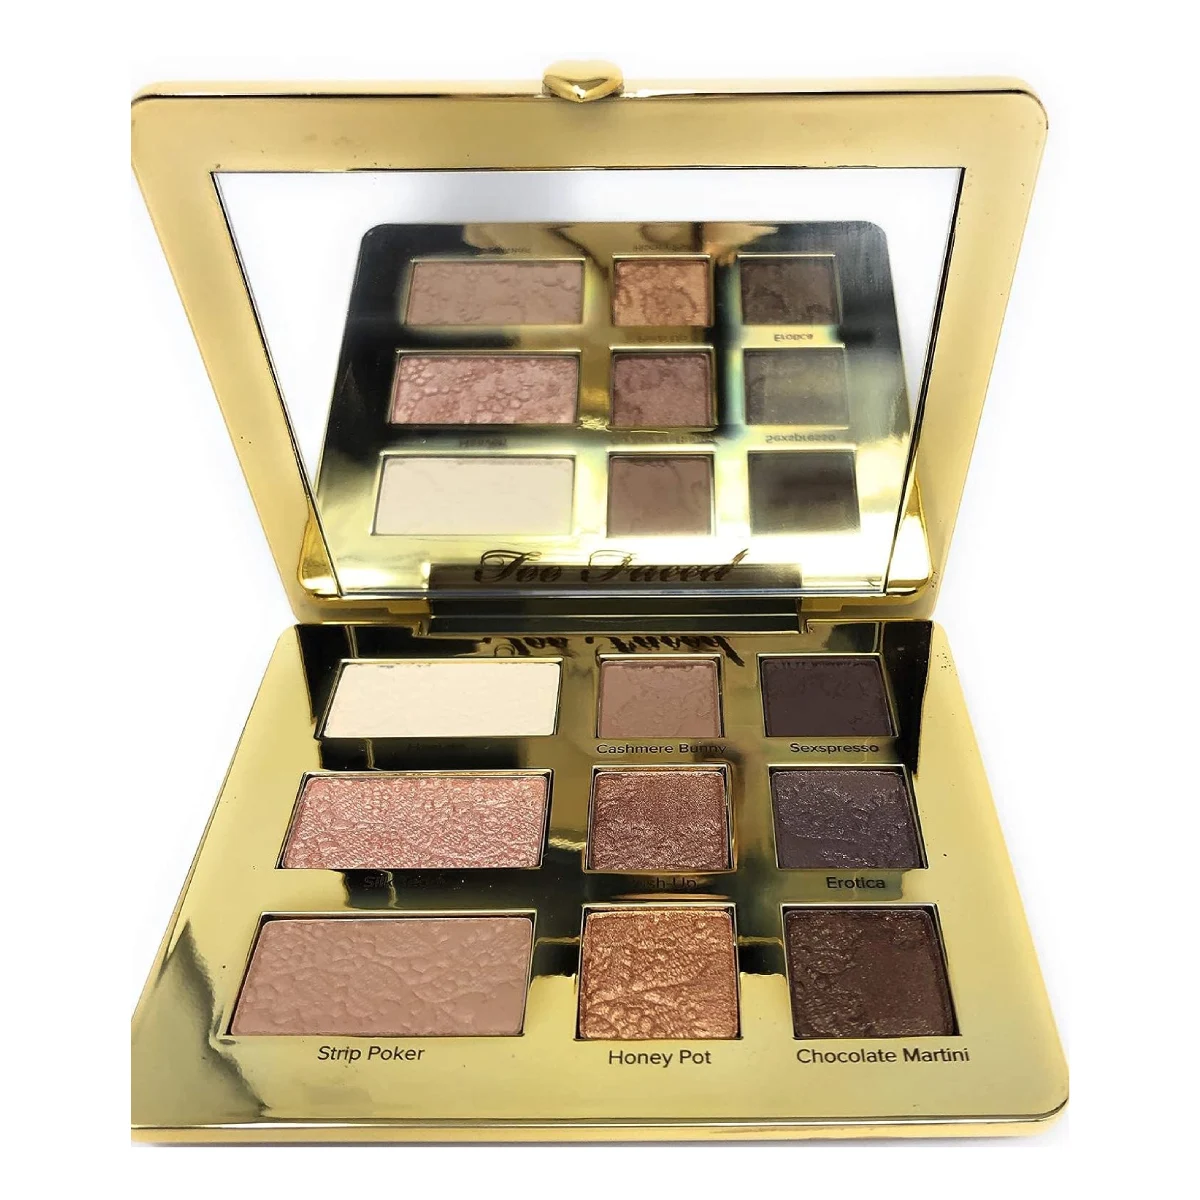 Open Too Faced Natural Eyes Eyeshadow Palette against a white background, showcasing a range of neutral shades from light beige to deep brown.